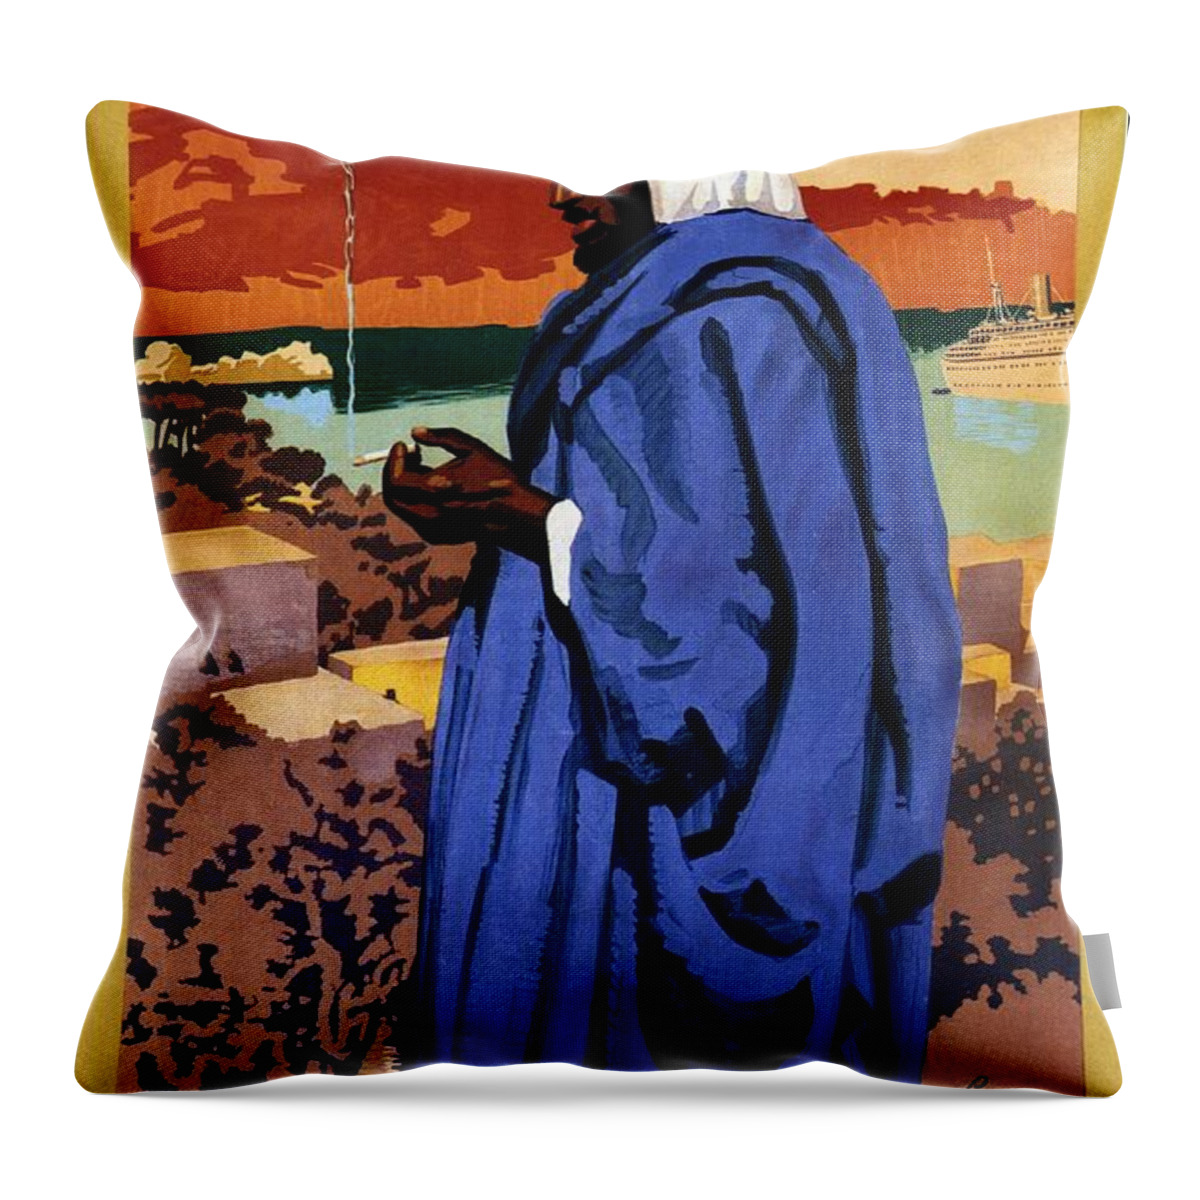 Canadian Pacific Throw Pillow featuring the painting Bedouin in a blue robe smoking cigarette - Vintage Advertising Poster for Canadian Pacific Steamship by Studio Grafiikka